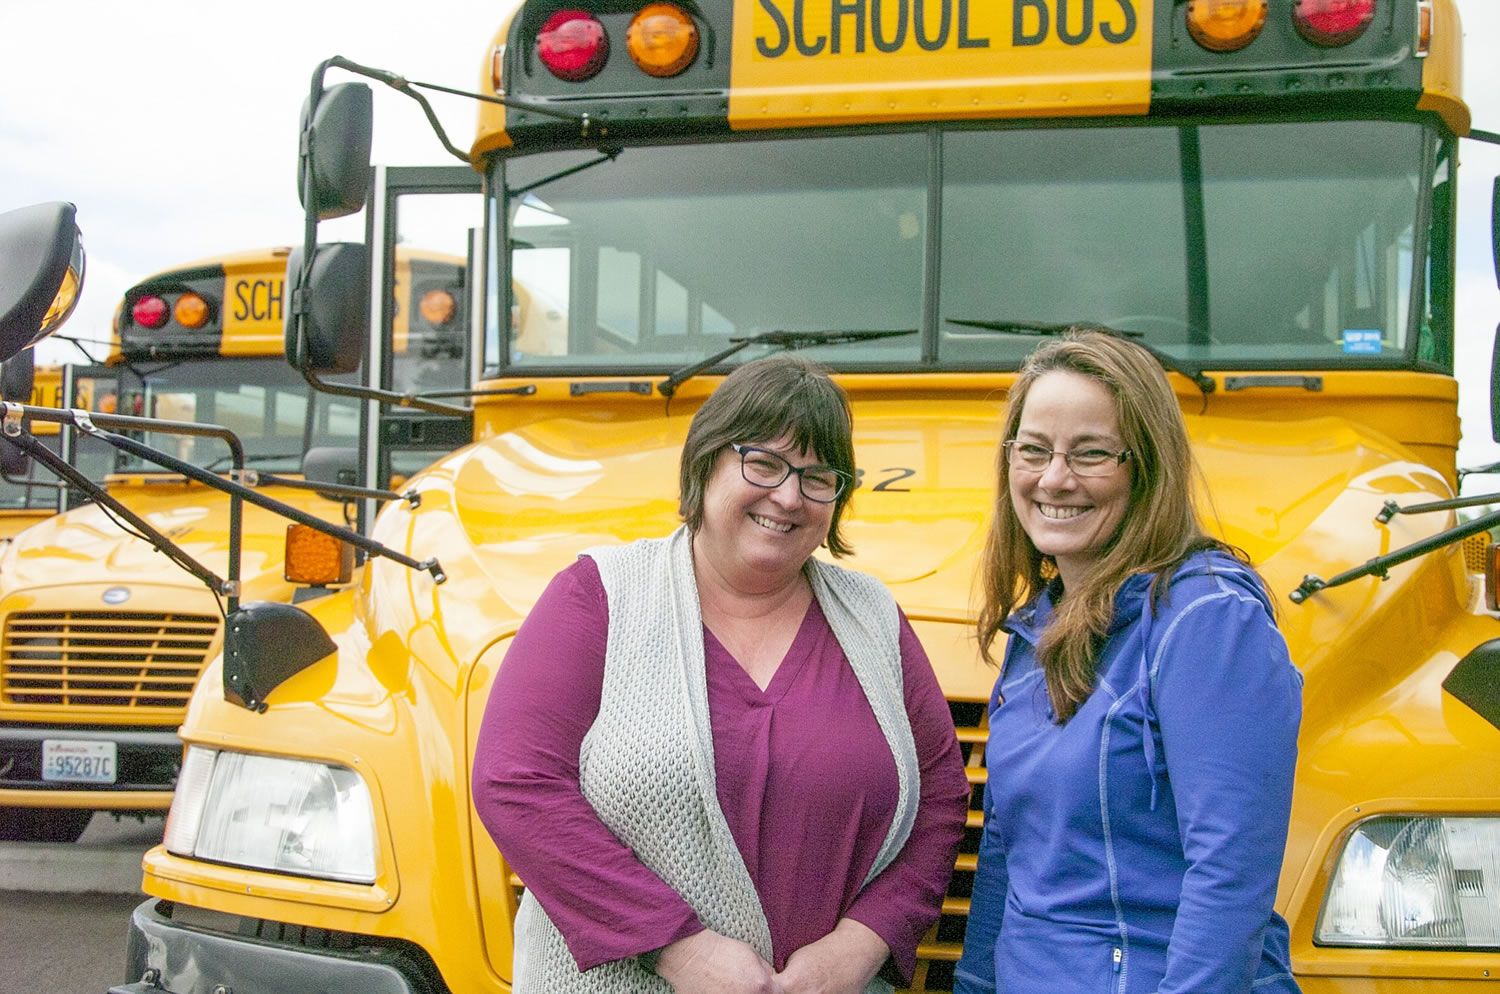 Judit Prihoda, left, and Ileen Neibert, right, pose for a photo in front of Neibert's bus at the Camas School District's transportation headquarters.